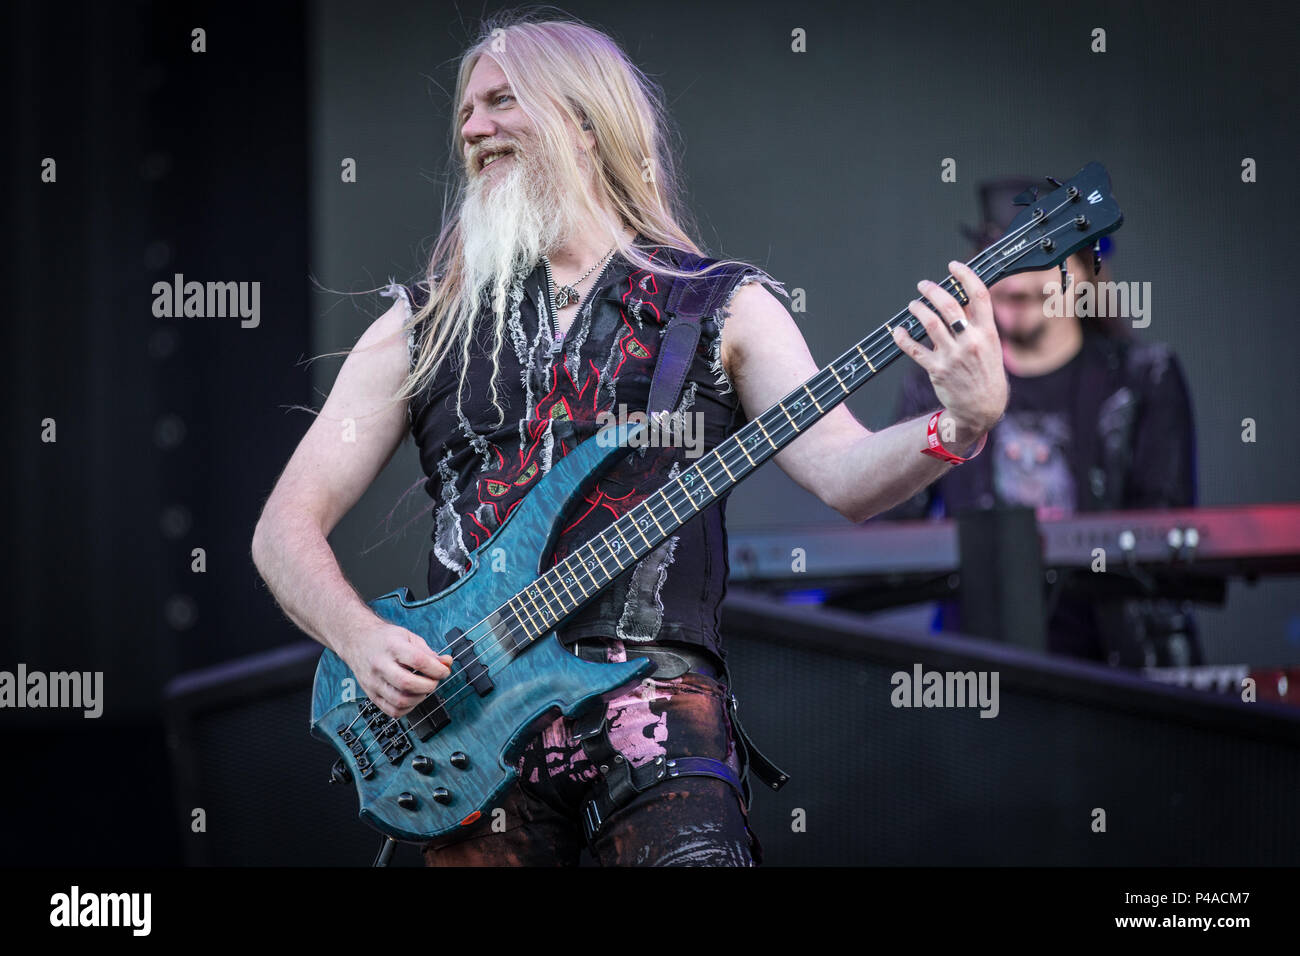 Denmark, Copenhagen - June 21, 2018. Nightwish, the Finnish symphonic metal band, performs a live concert during the Danish heavy metal festival Copenhell 2018 in Copenhagen. Here bass player Marco Hietala is seen live on stage. (Photo credit: Gonzales Photo - Thomas Rasmussen). Credit: Gonzales Photo/Alamy Live News Stock Photo